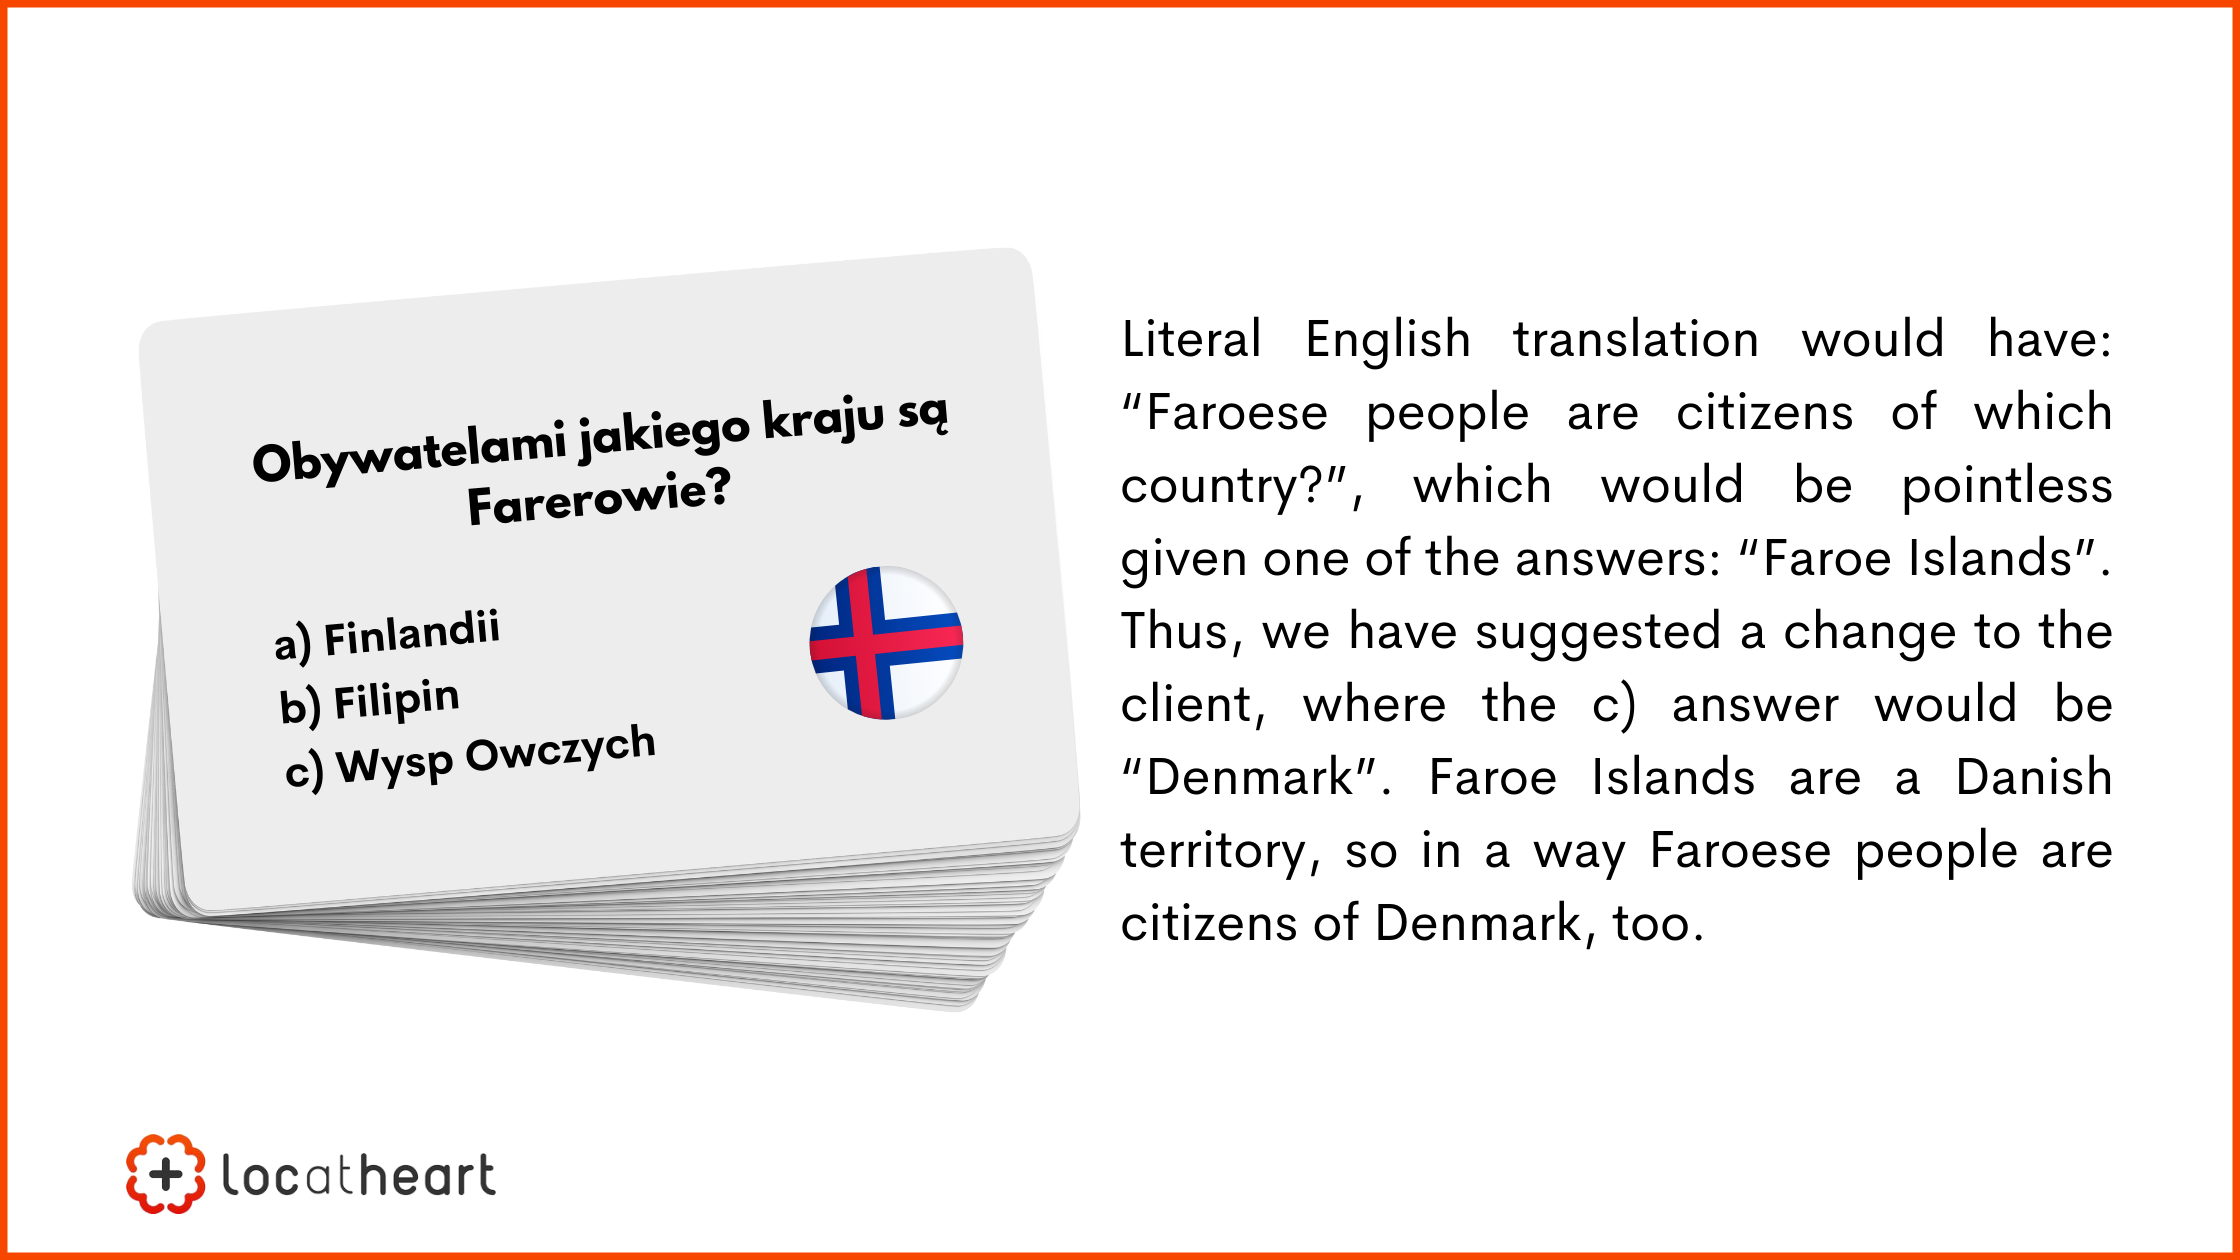 board and card games translation: Literal English translation would have: “Faroese people are citizens of which country?”, which would be pointless given one of the answers: “Faroe Islands”. Thus, we have suggested a change to the client, where the c) answer would be “Denmark”. Faroe Islands are a Danish territory, so in a way Faroese people are citizens of Denmark, too.